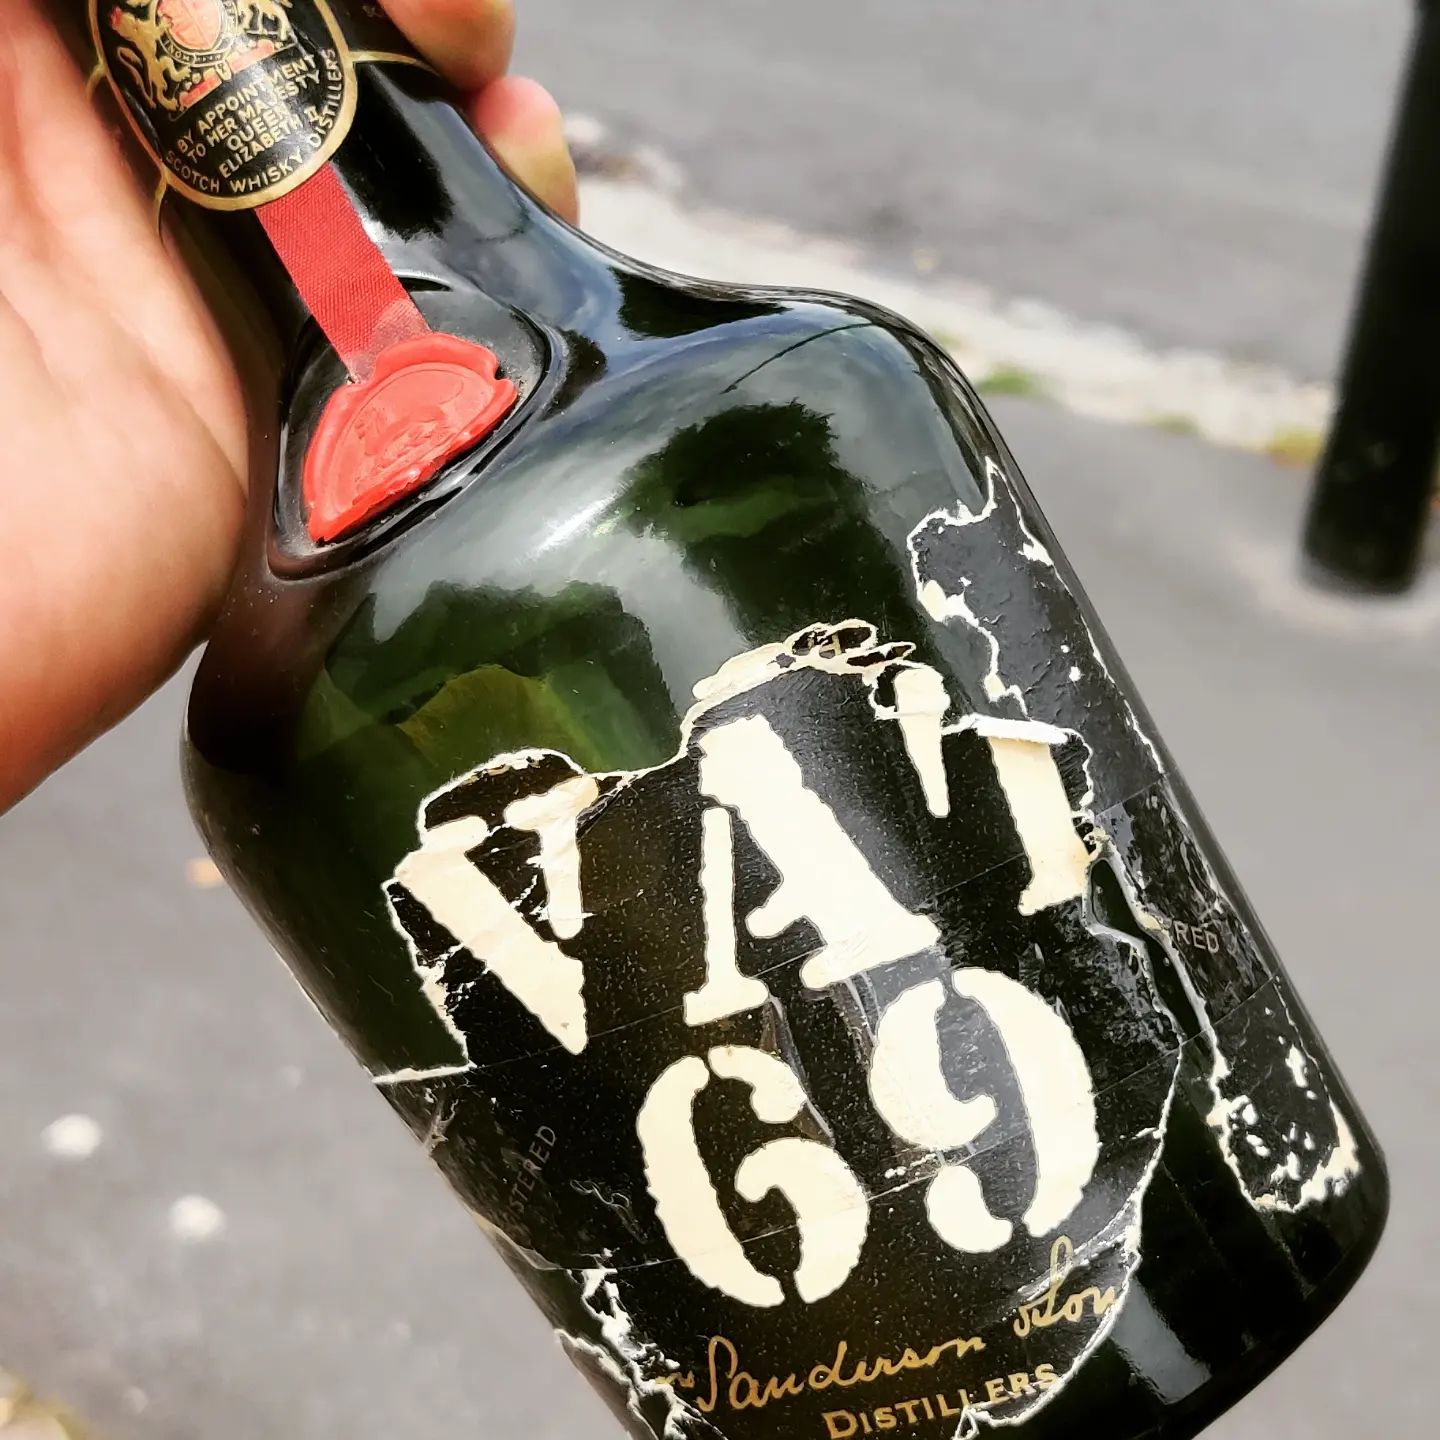 Bye bye delicious blended whisky from The Past. You were a joy to have around, but all things must pass. #lovescotch #vat69 #oldblend